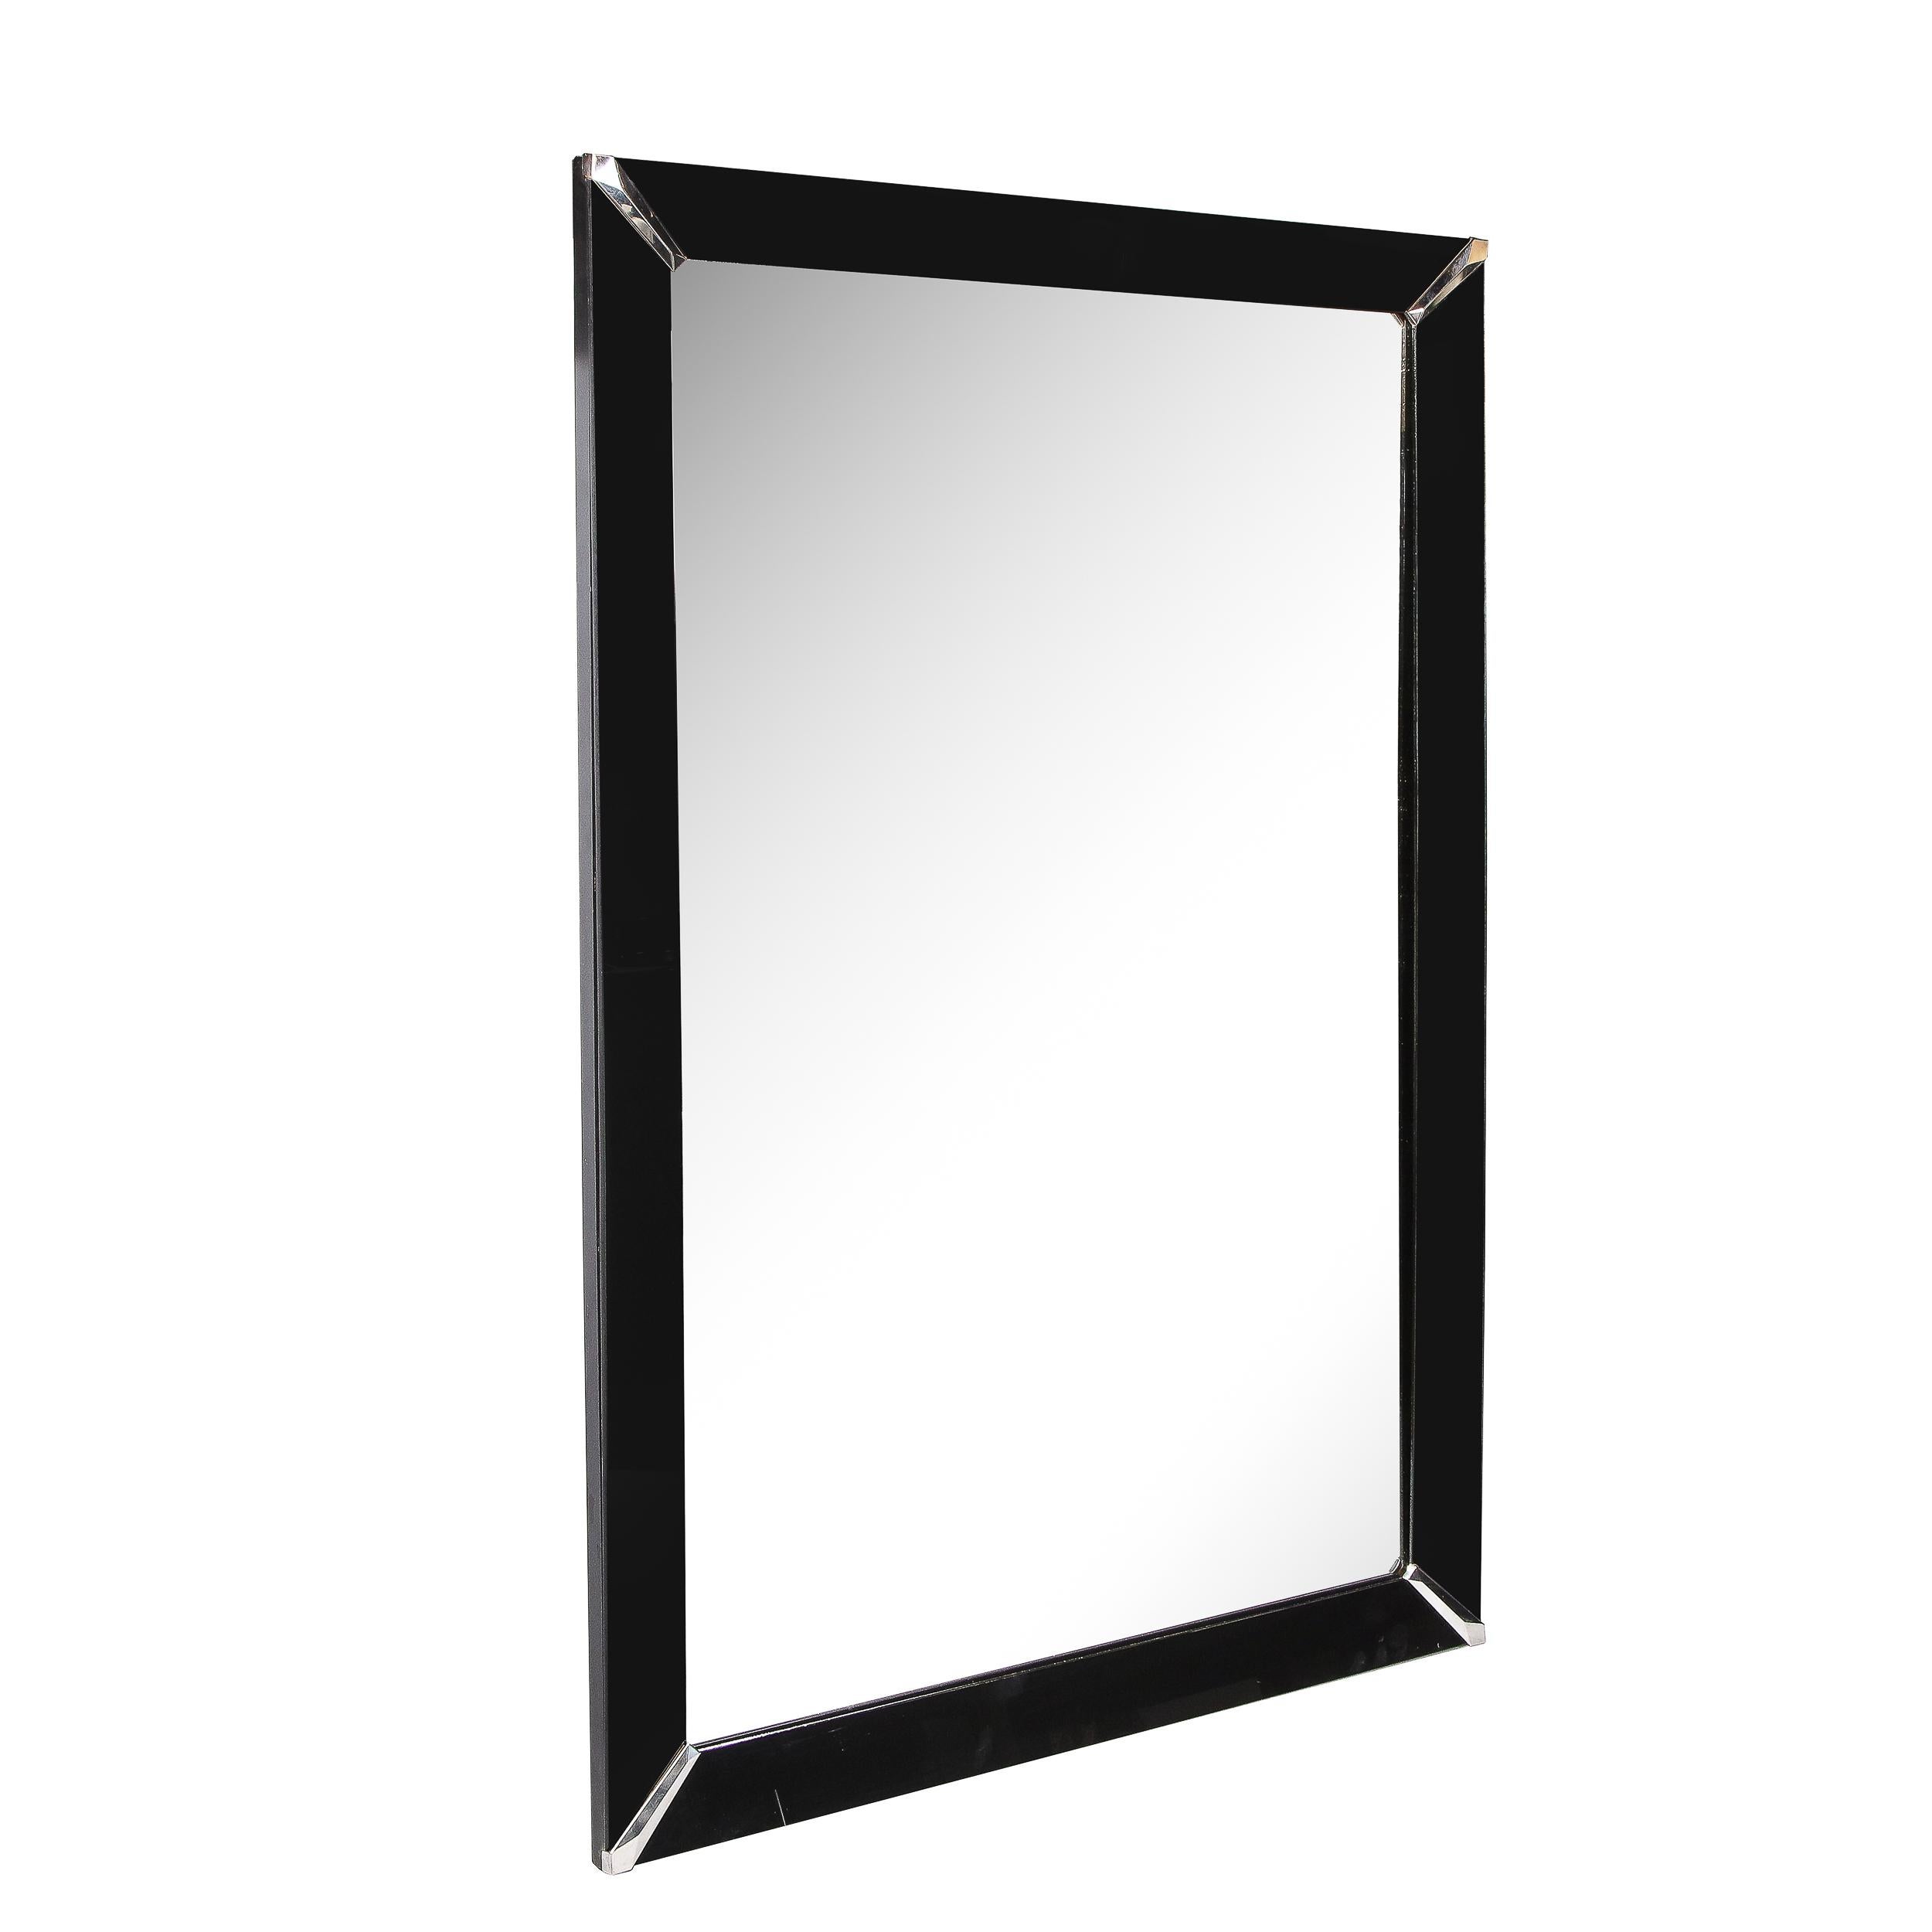 This elegant and understated Art Deco mirror was realized in the United States circa 1930. It offers a rectangular form composed of four segments of black vitrolite adjoined in each corner by darted pentagonal polished chrome embellishments- that